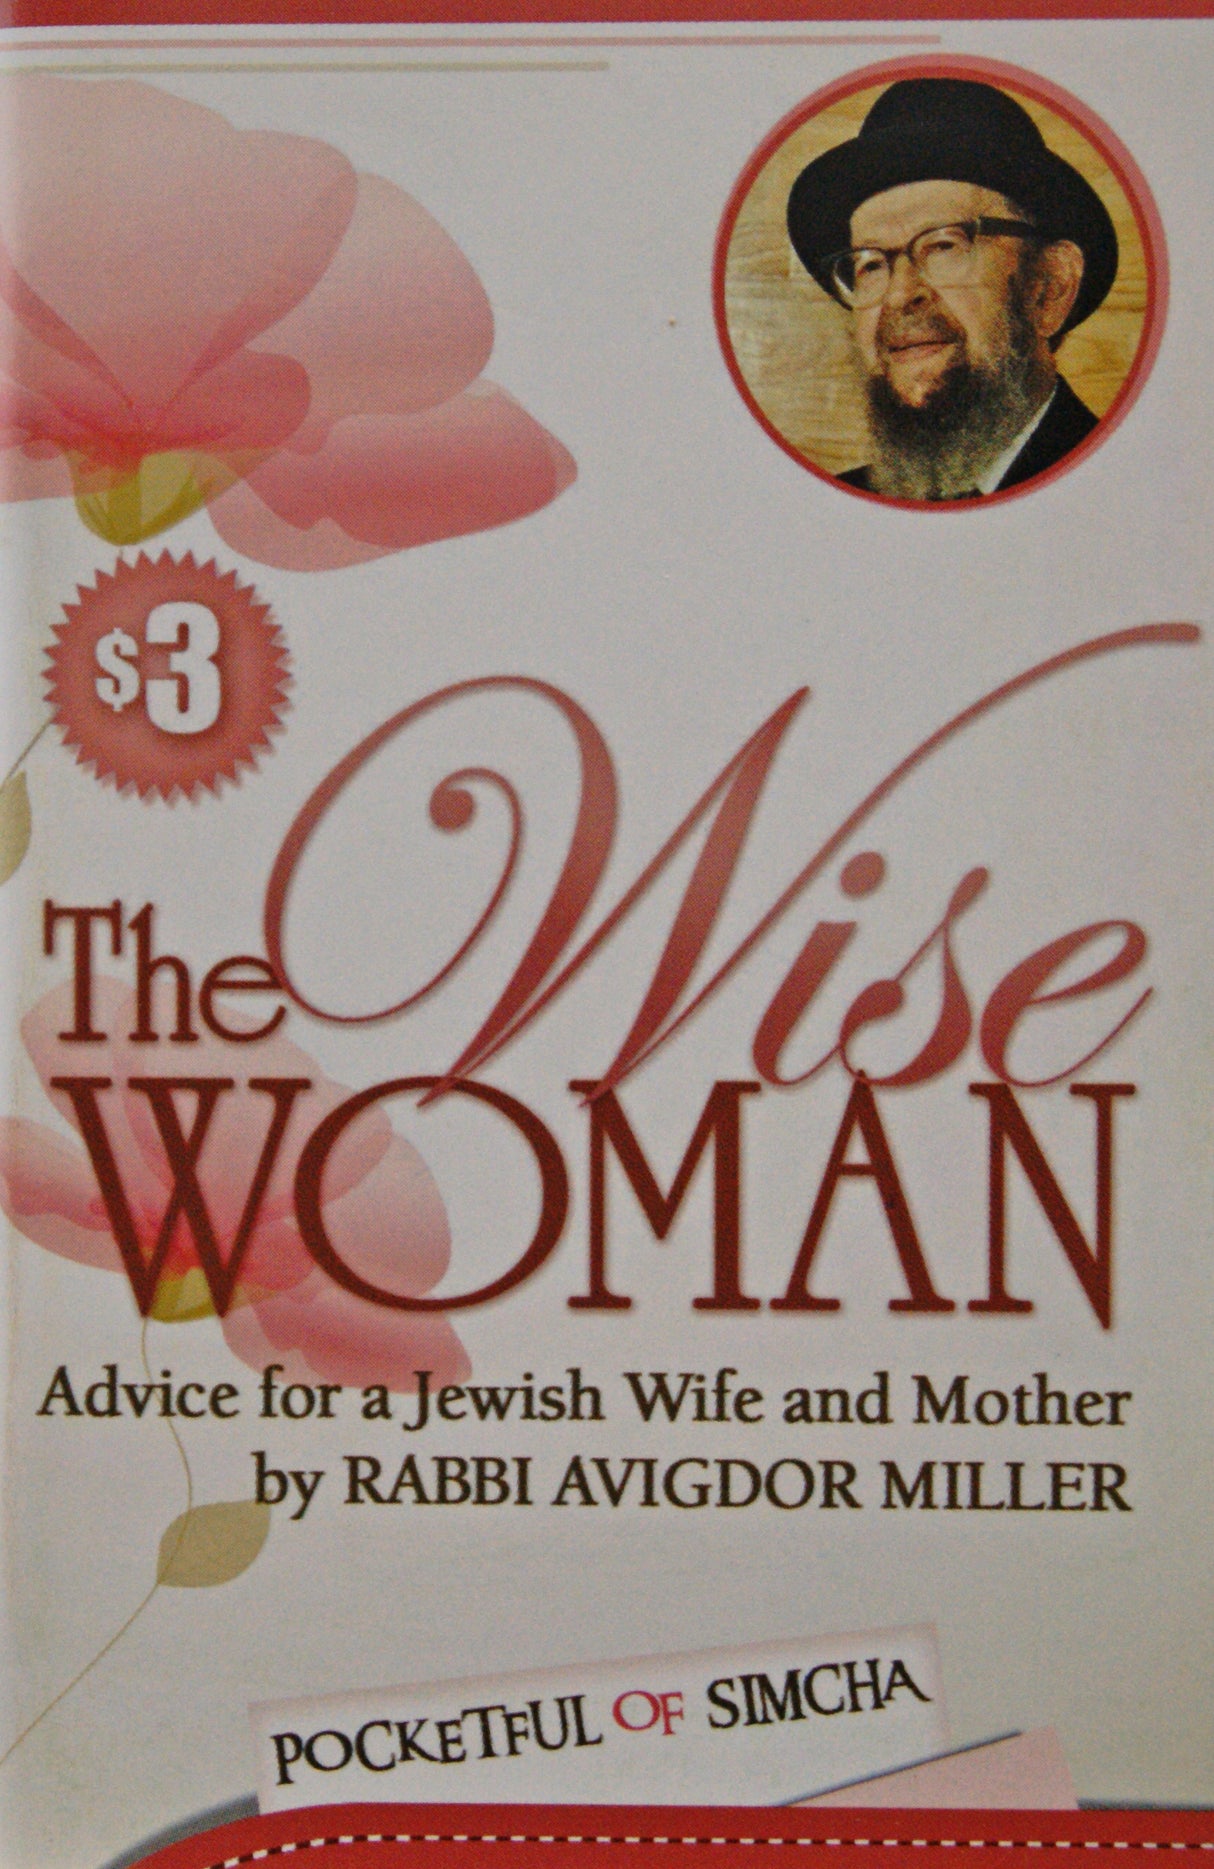 Wise Woman - Advice for a Jewish Wife and Mother